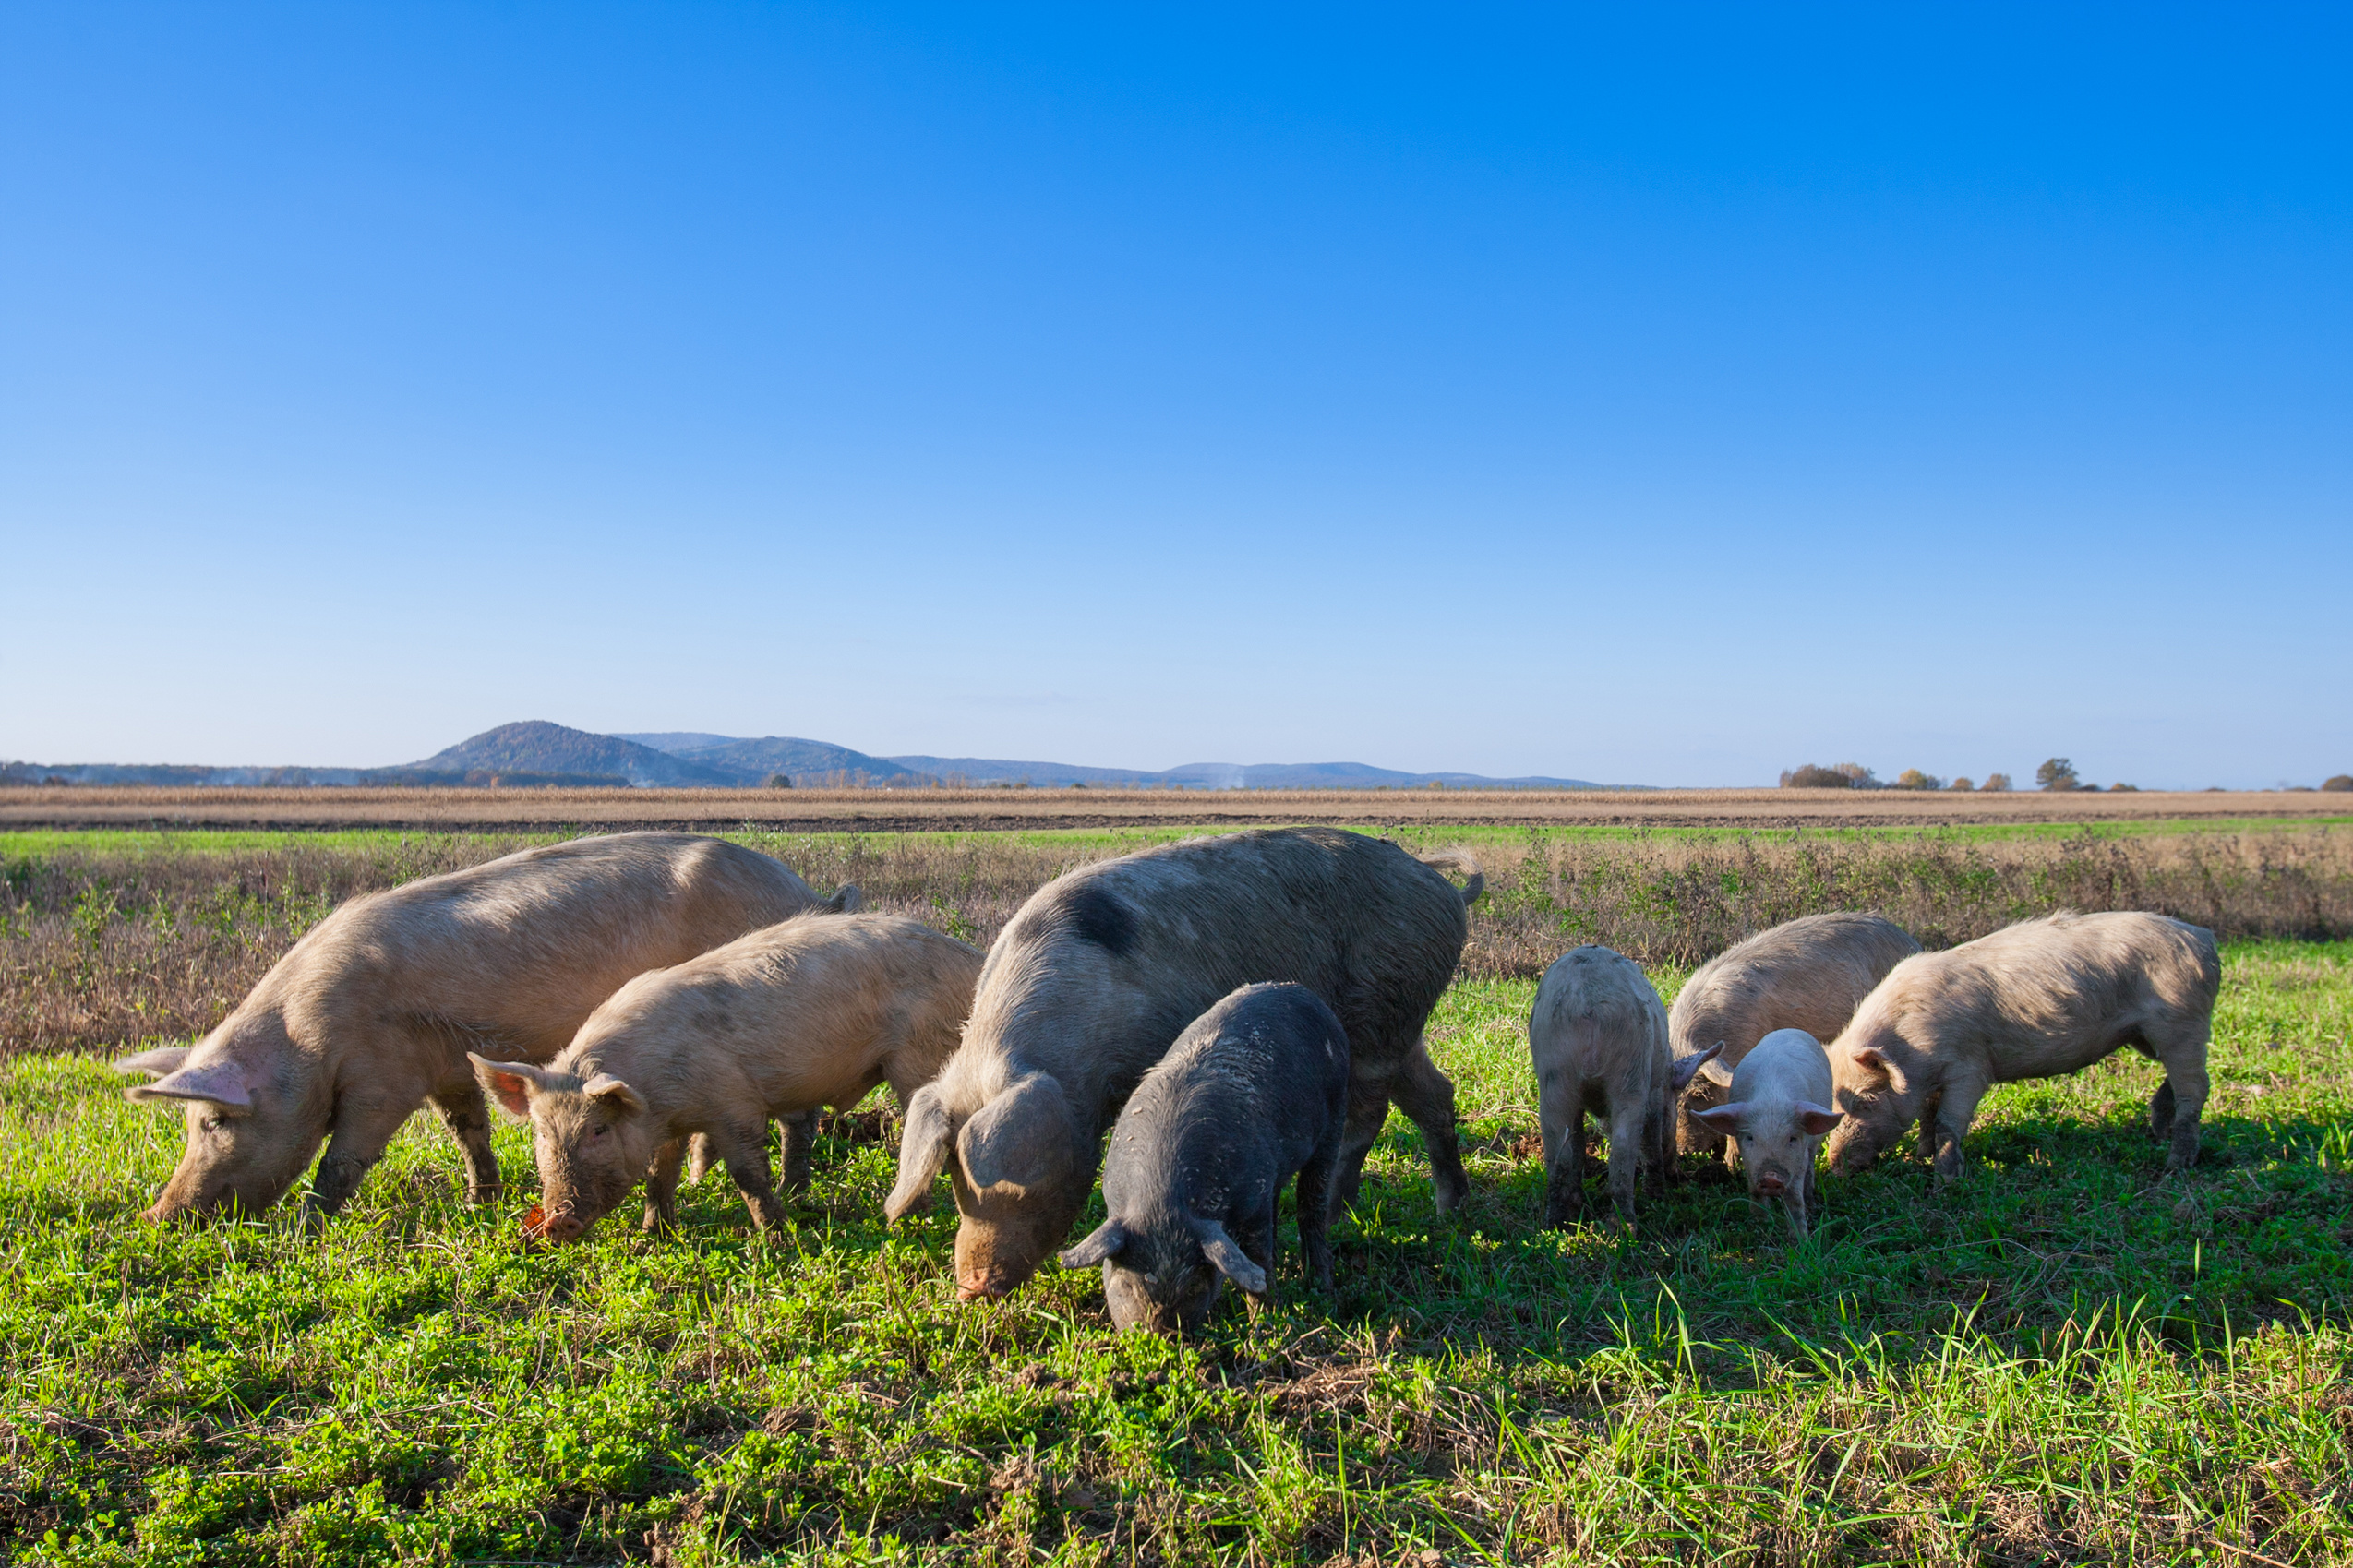 pigs grazing in green fields in front of a mountain